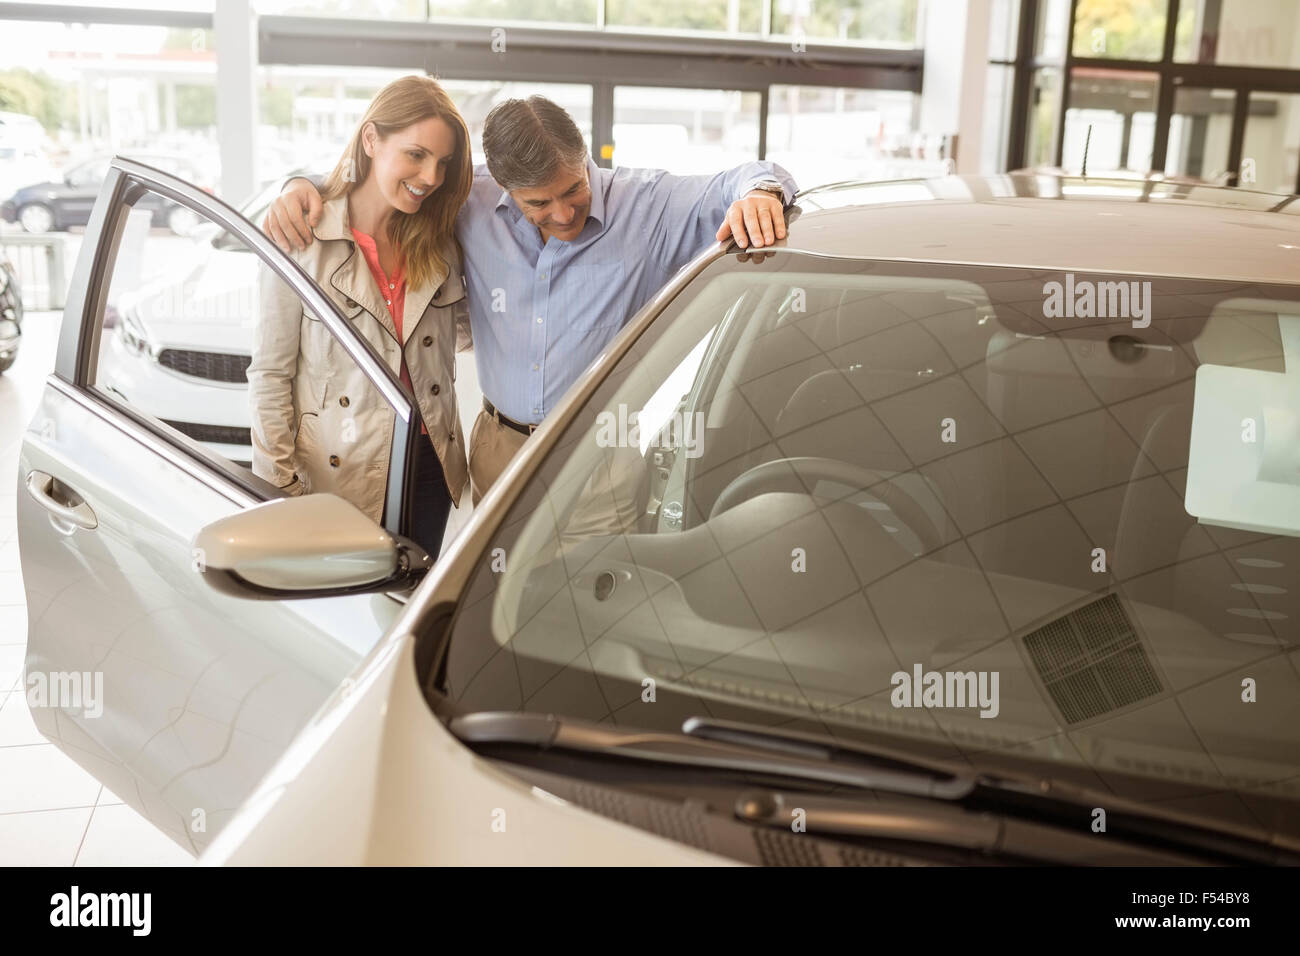 Smiling couple leaning on car Stock Photo